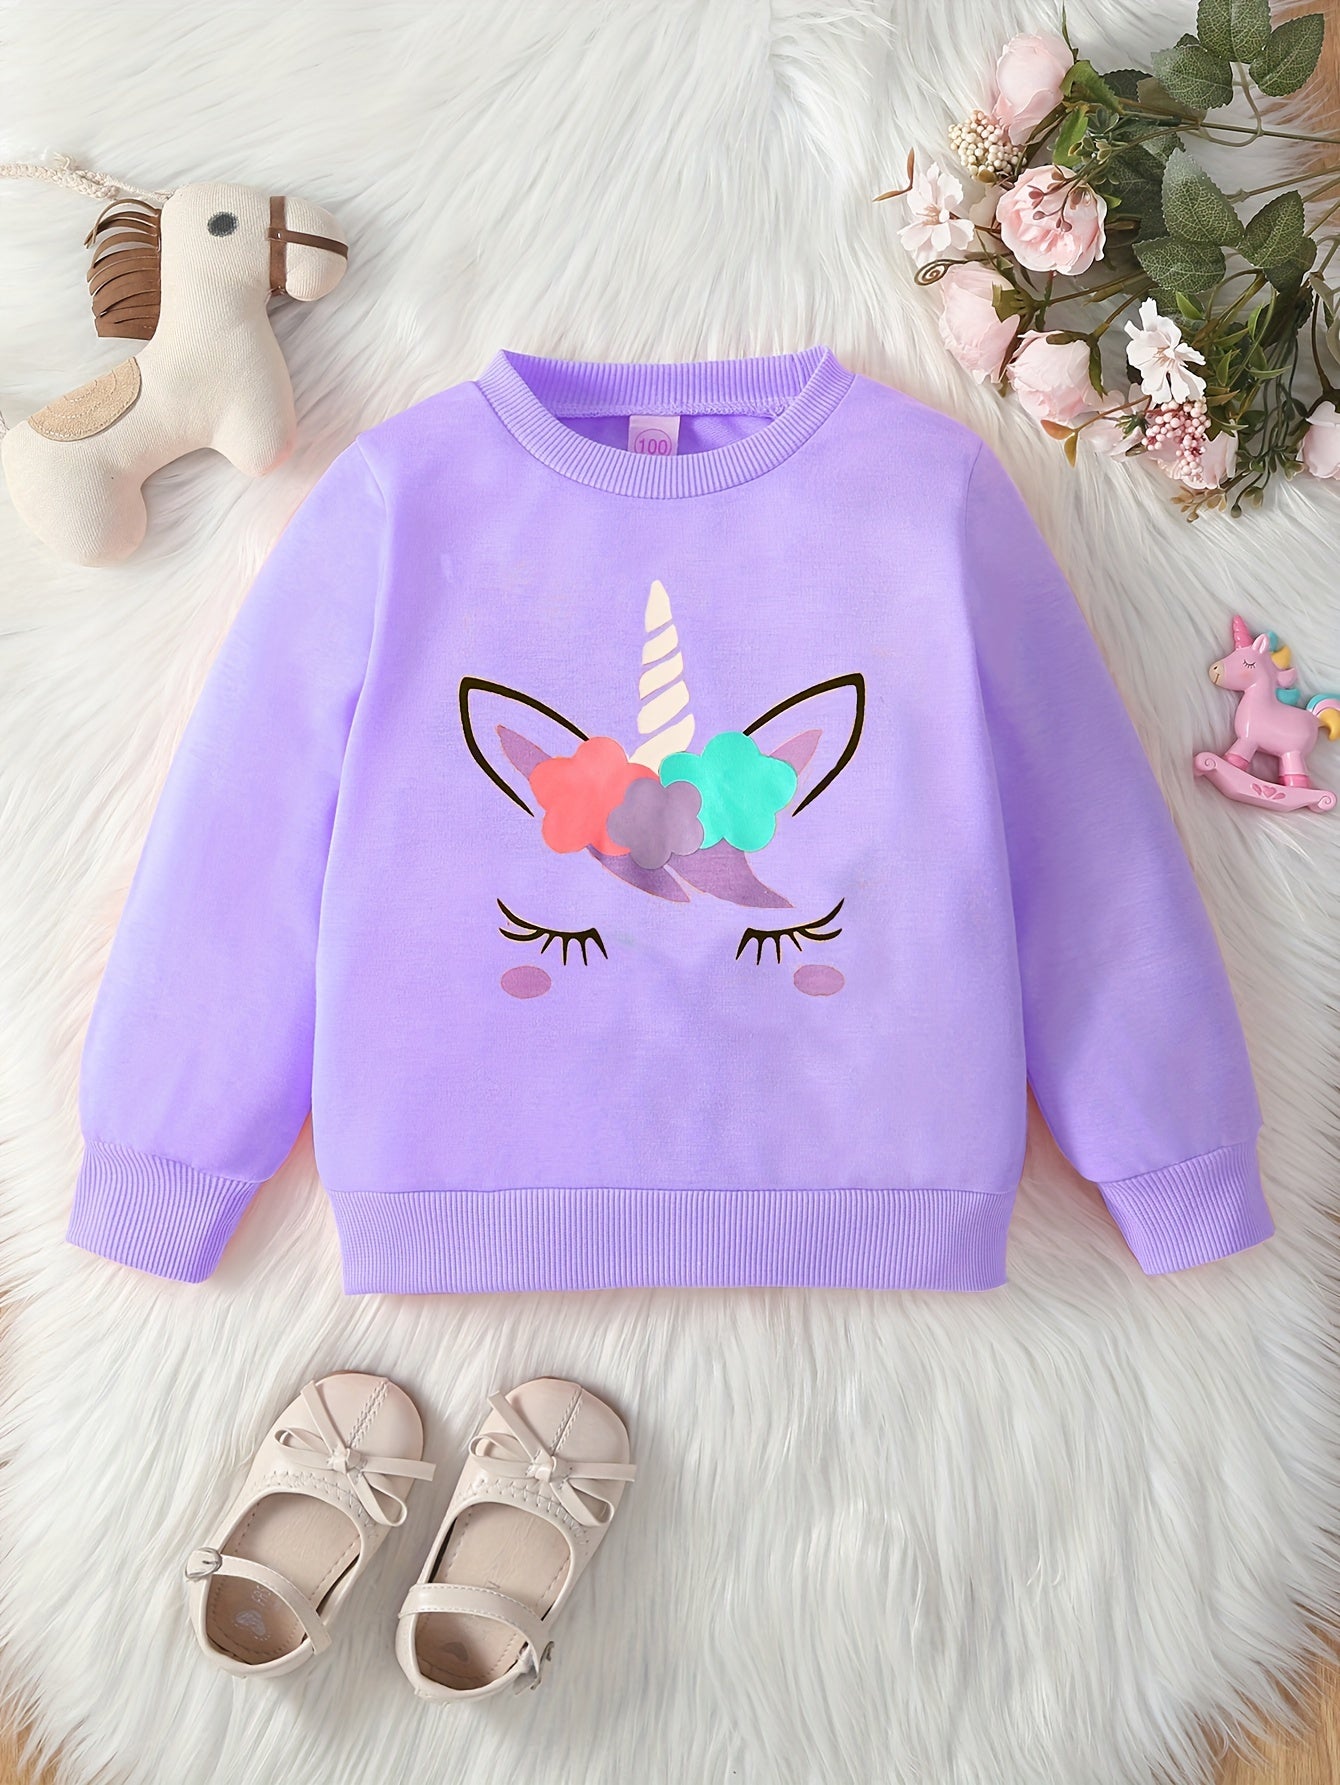 Kid's Cartoon Floral Pattern Sweatshirt, Casual Long Sleeve Top, Toddler Girl's Clothes For Spring Fall